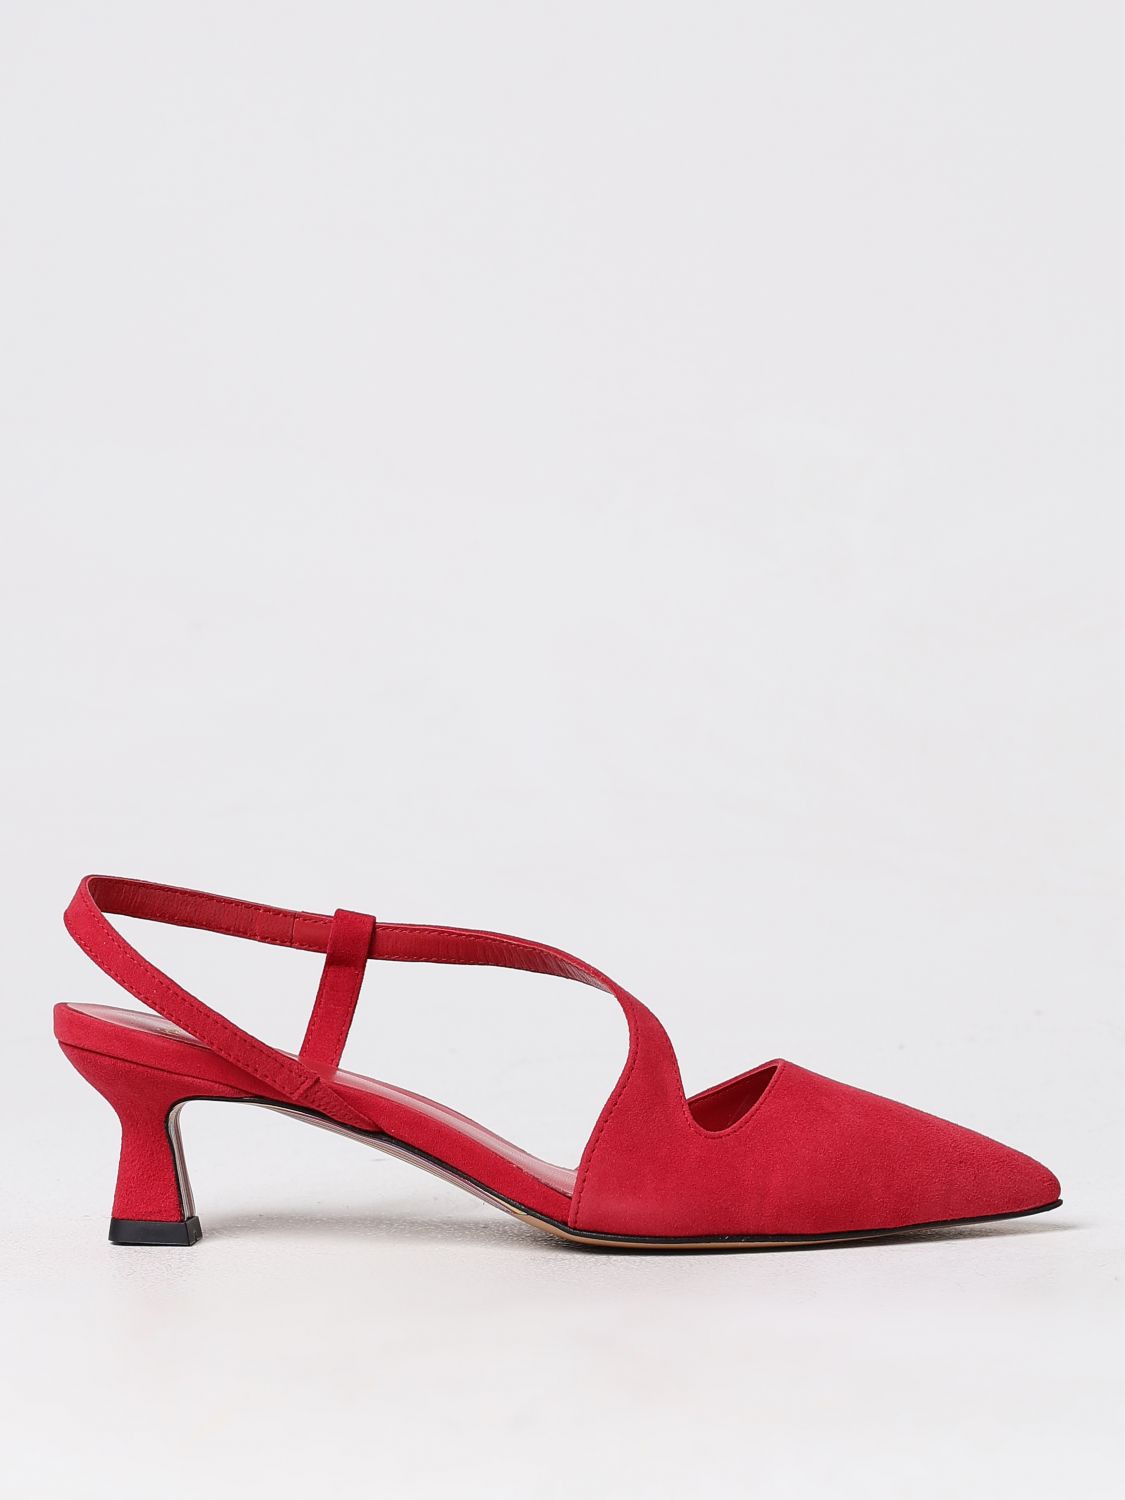 Paul Smith High Heel Shoes PAUL SMITH Woman color Red